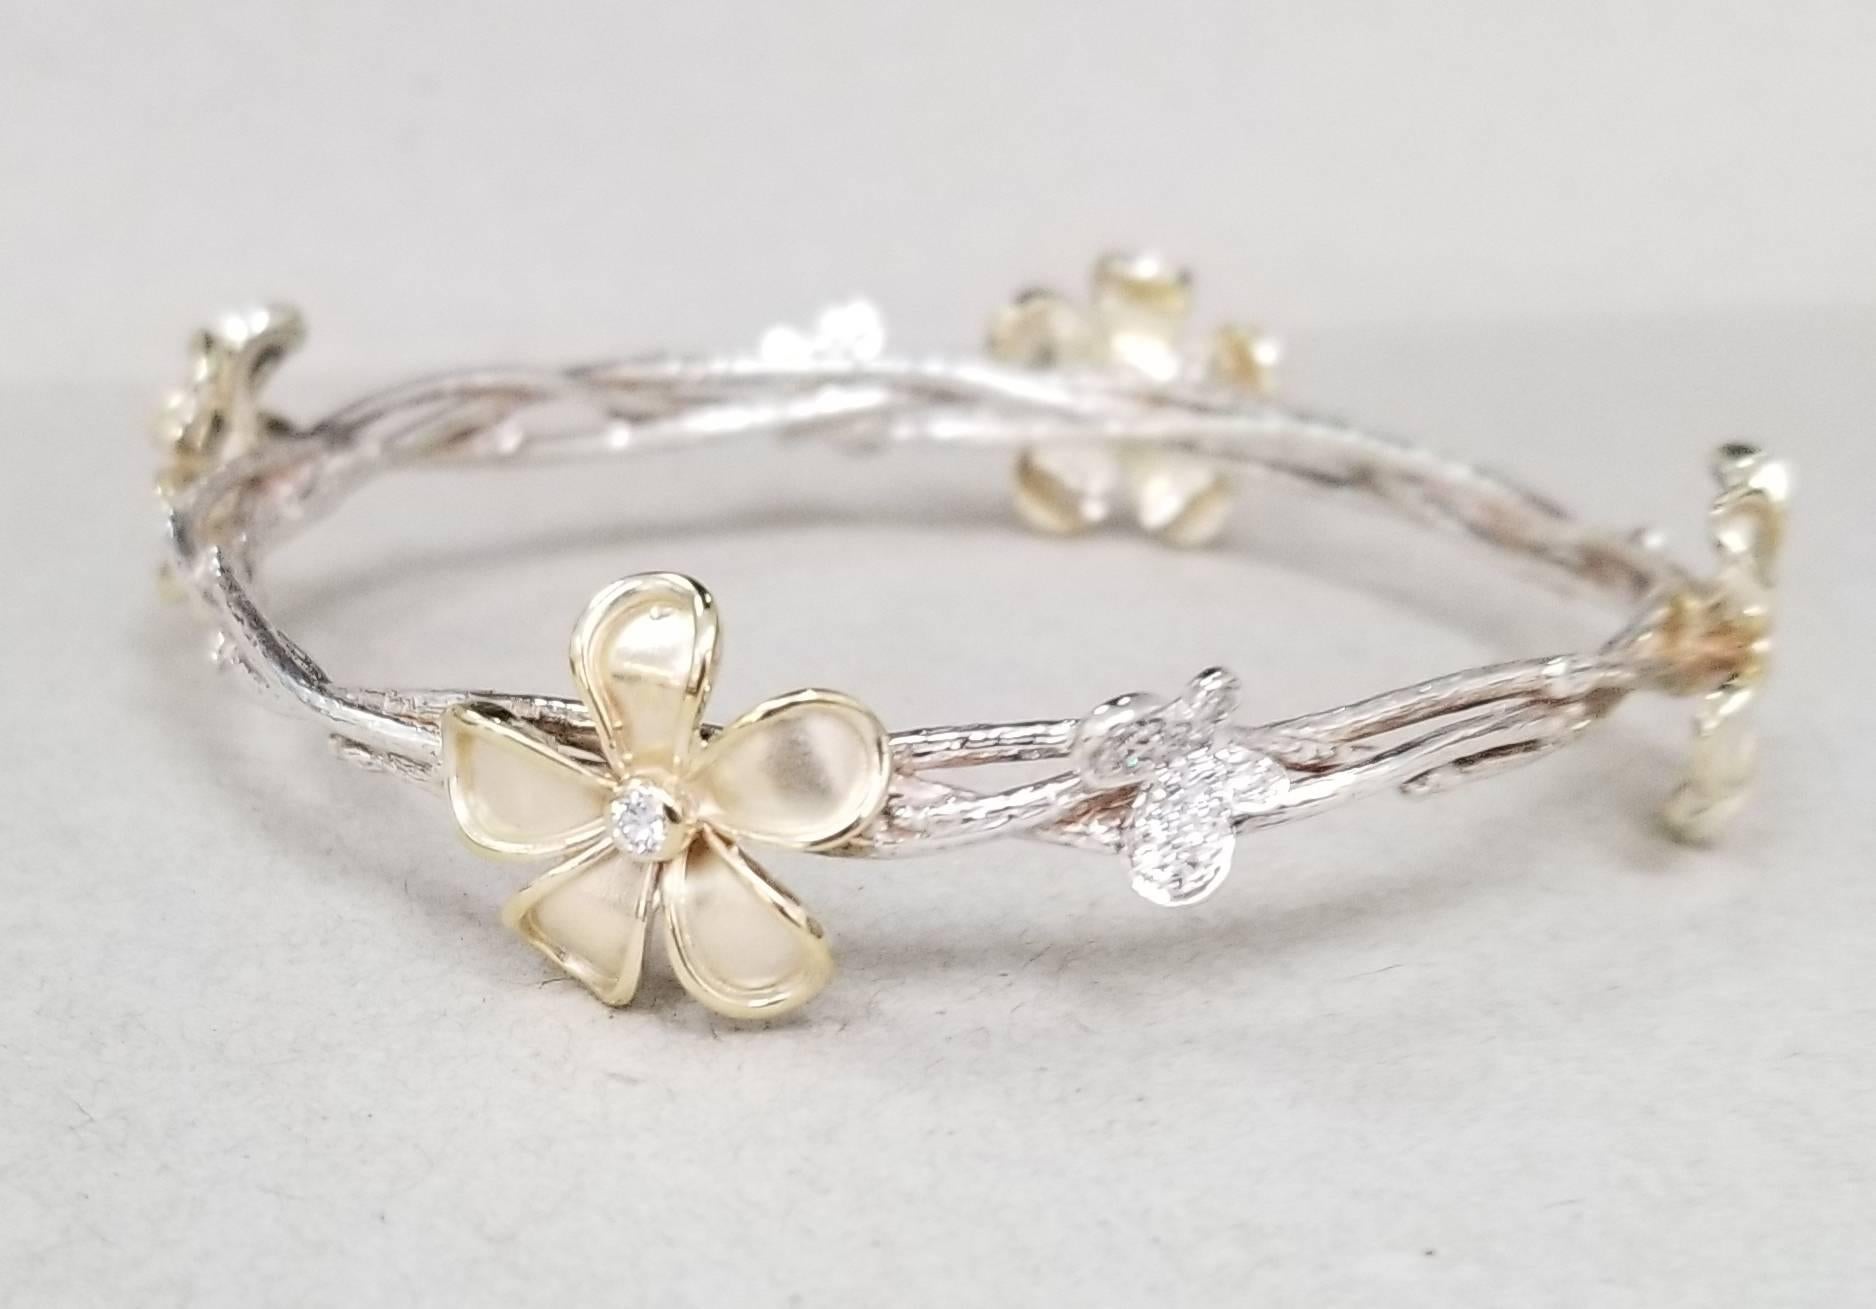 14k yellow gold flowers with diamonds weighing .50pts. on a silver 